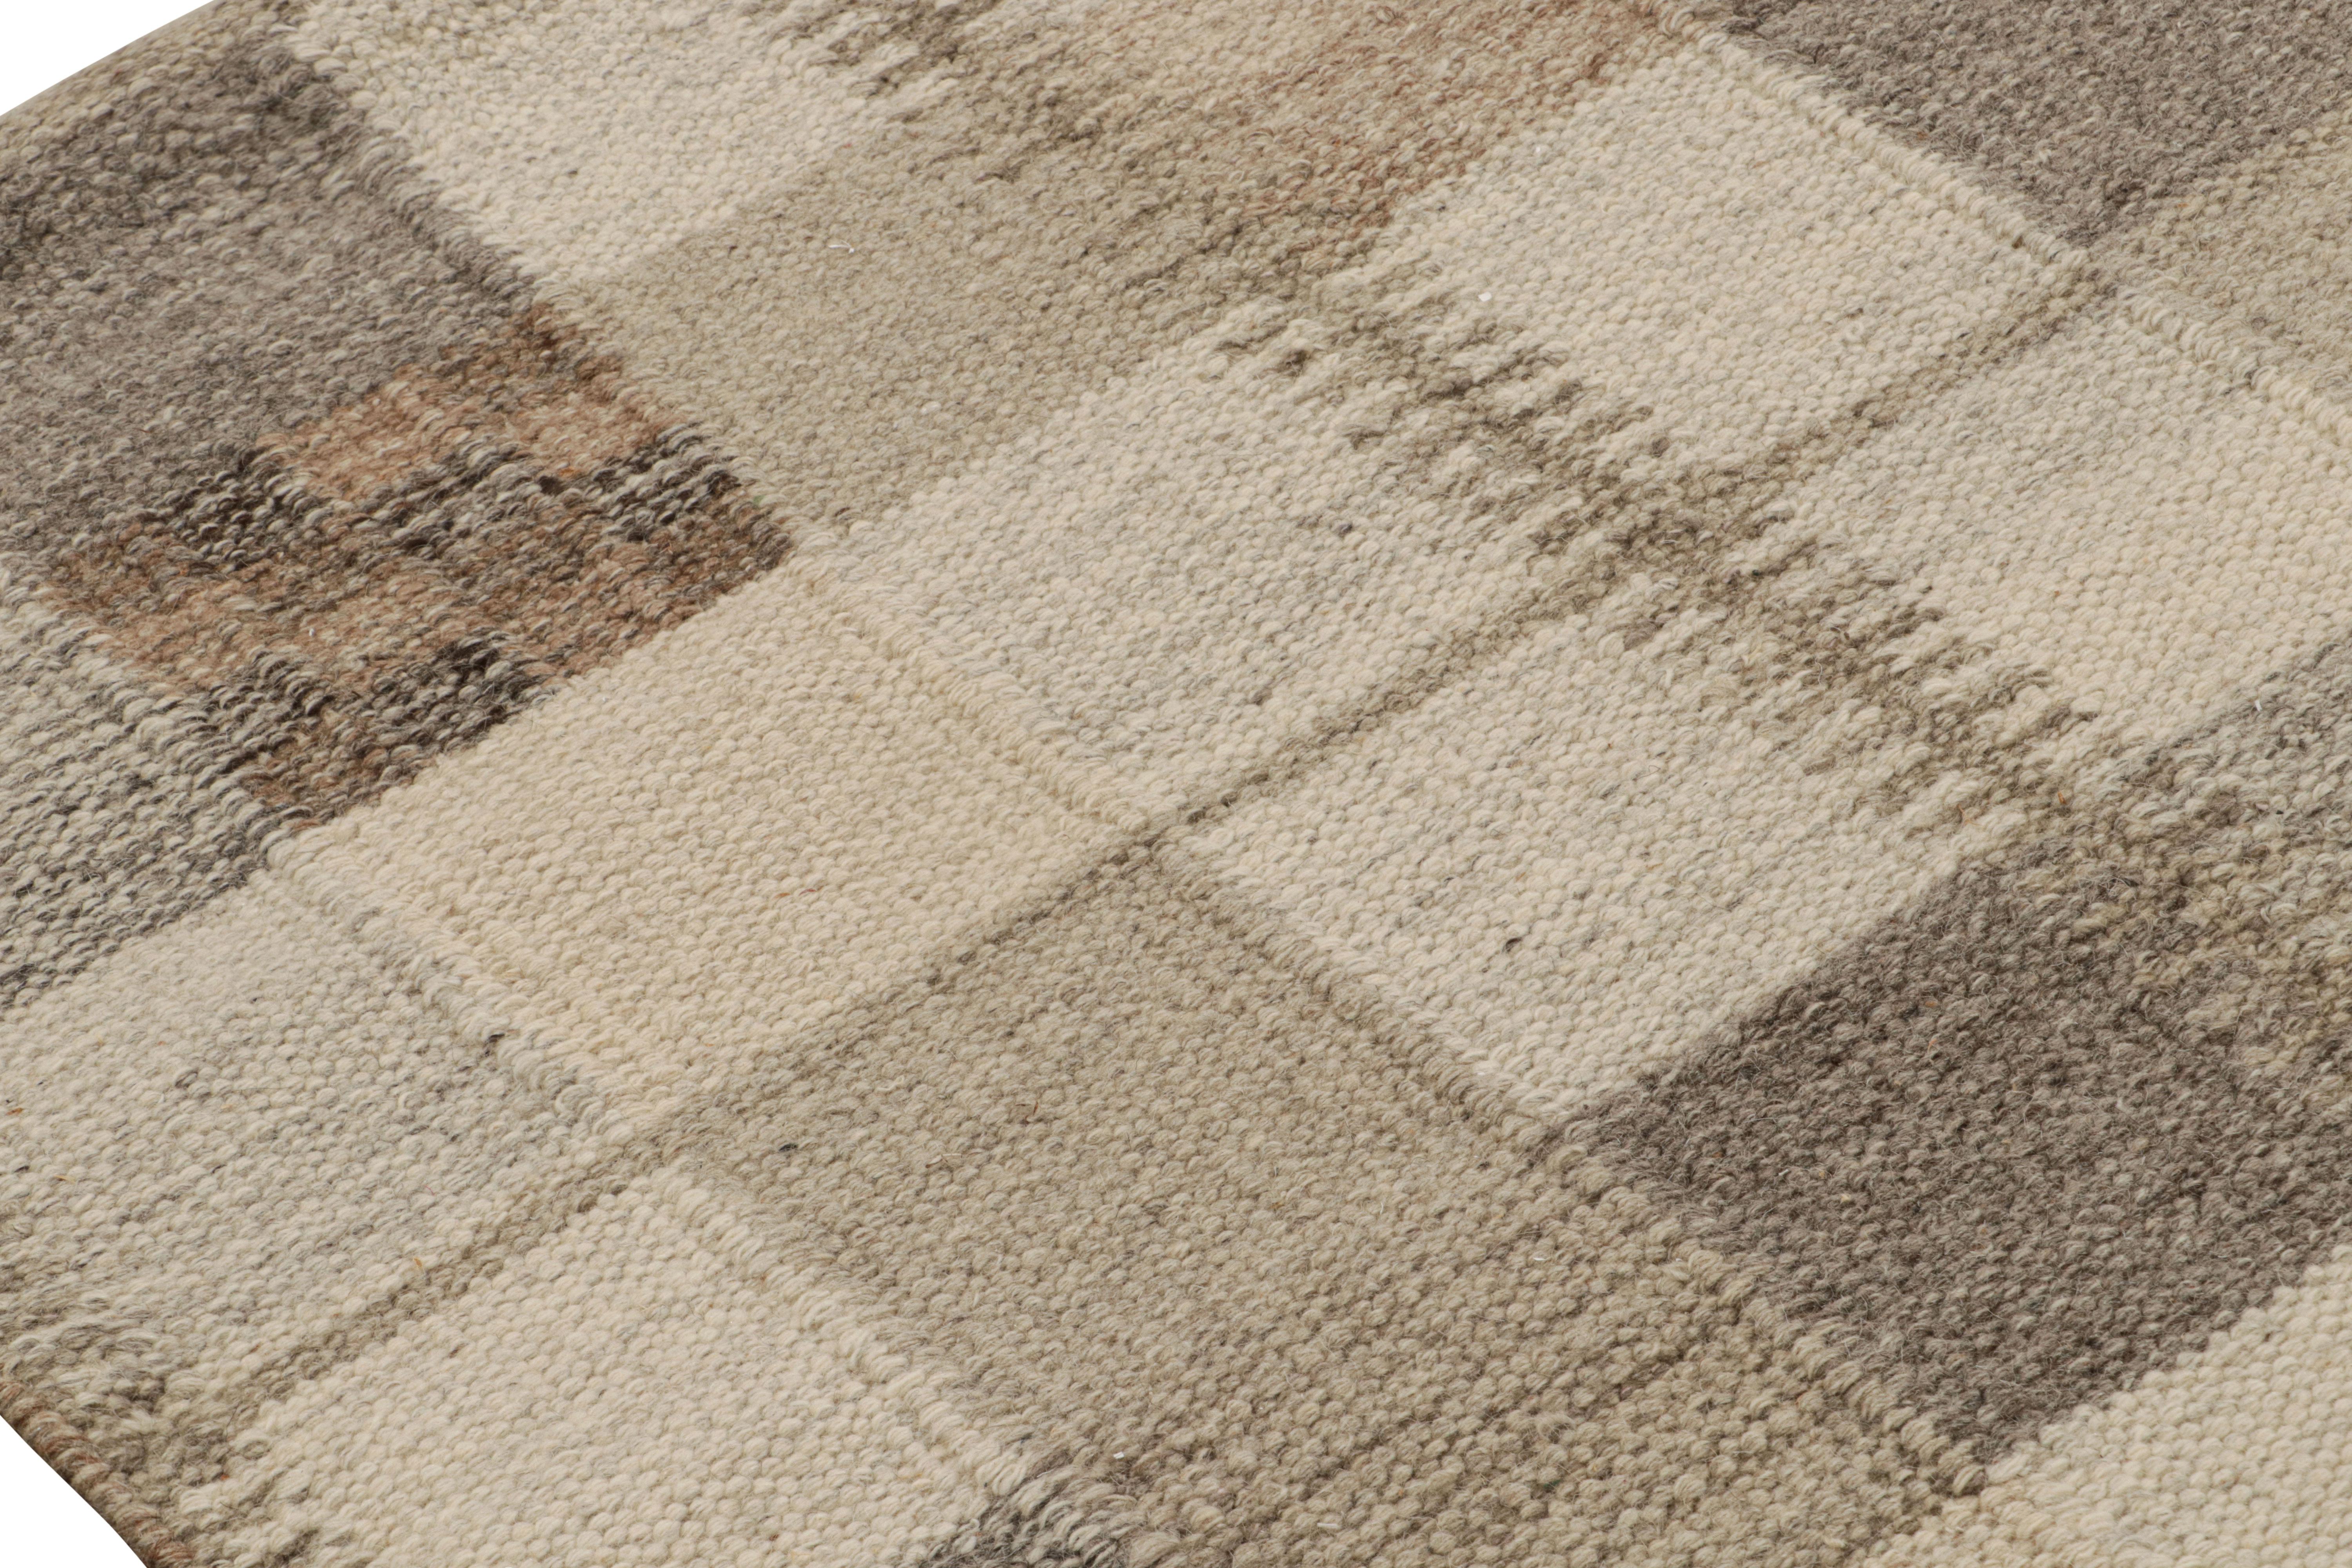 Hand-Woven Rug & Kilim’s Scandinavian Rug With Beige-Brown Geometric Patterns For Sale